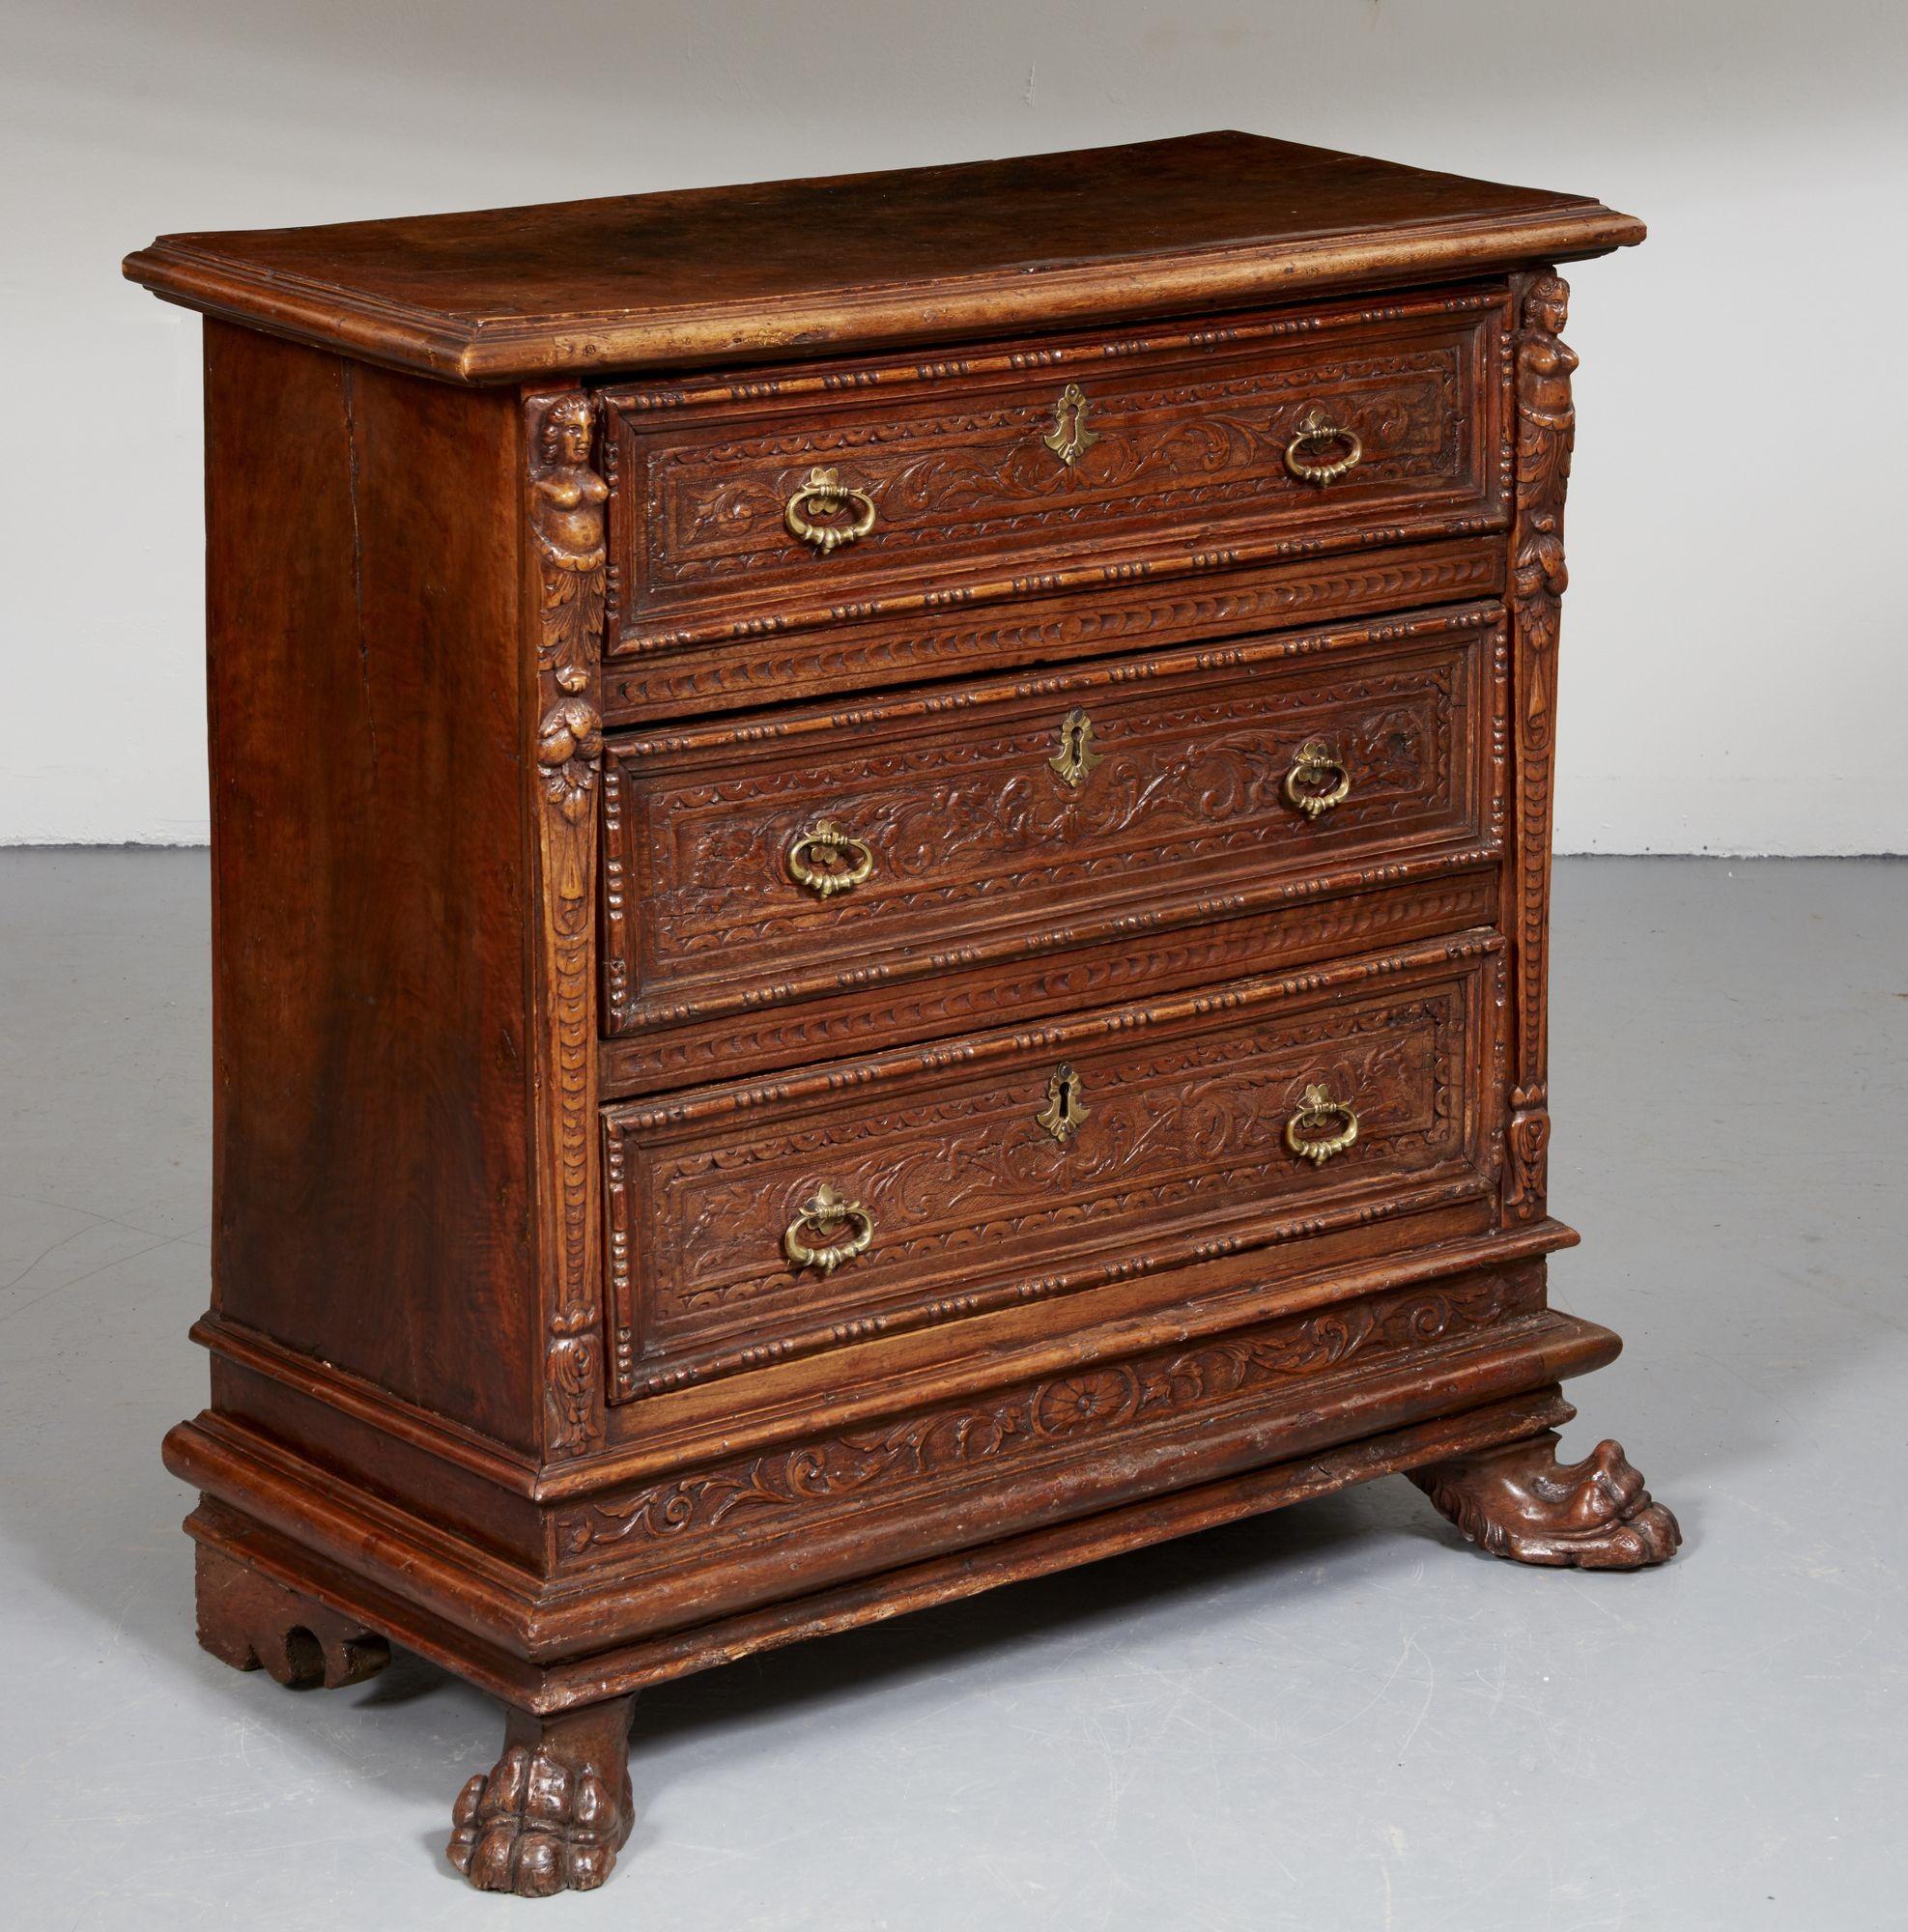 Very Fine Northern Italian (Tuscan) Renaissance commode, the molded top over three drawers with arabesque carved fronts and applied molded edges, the sides carved with term figures and standing on heavily molded base and standing on paw feet, the